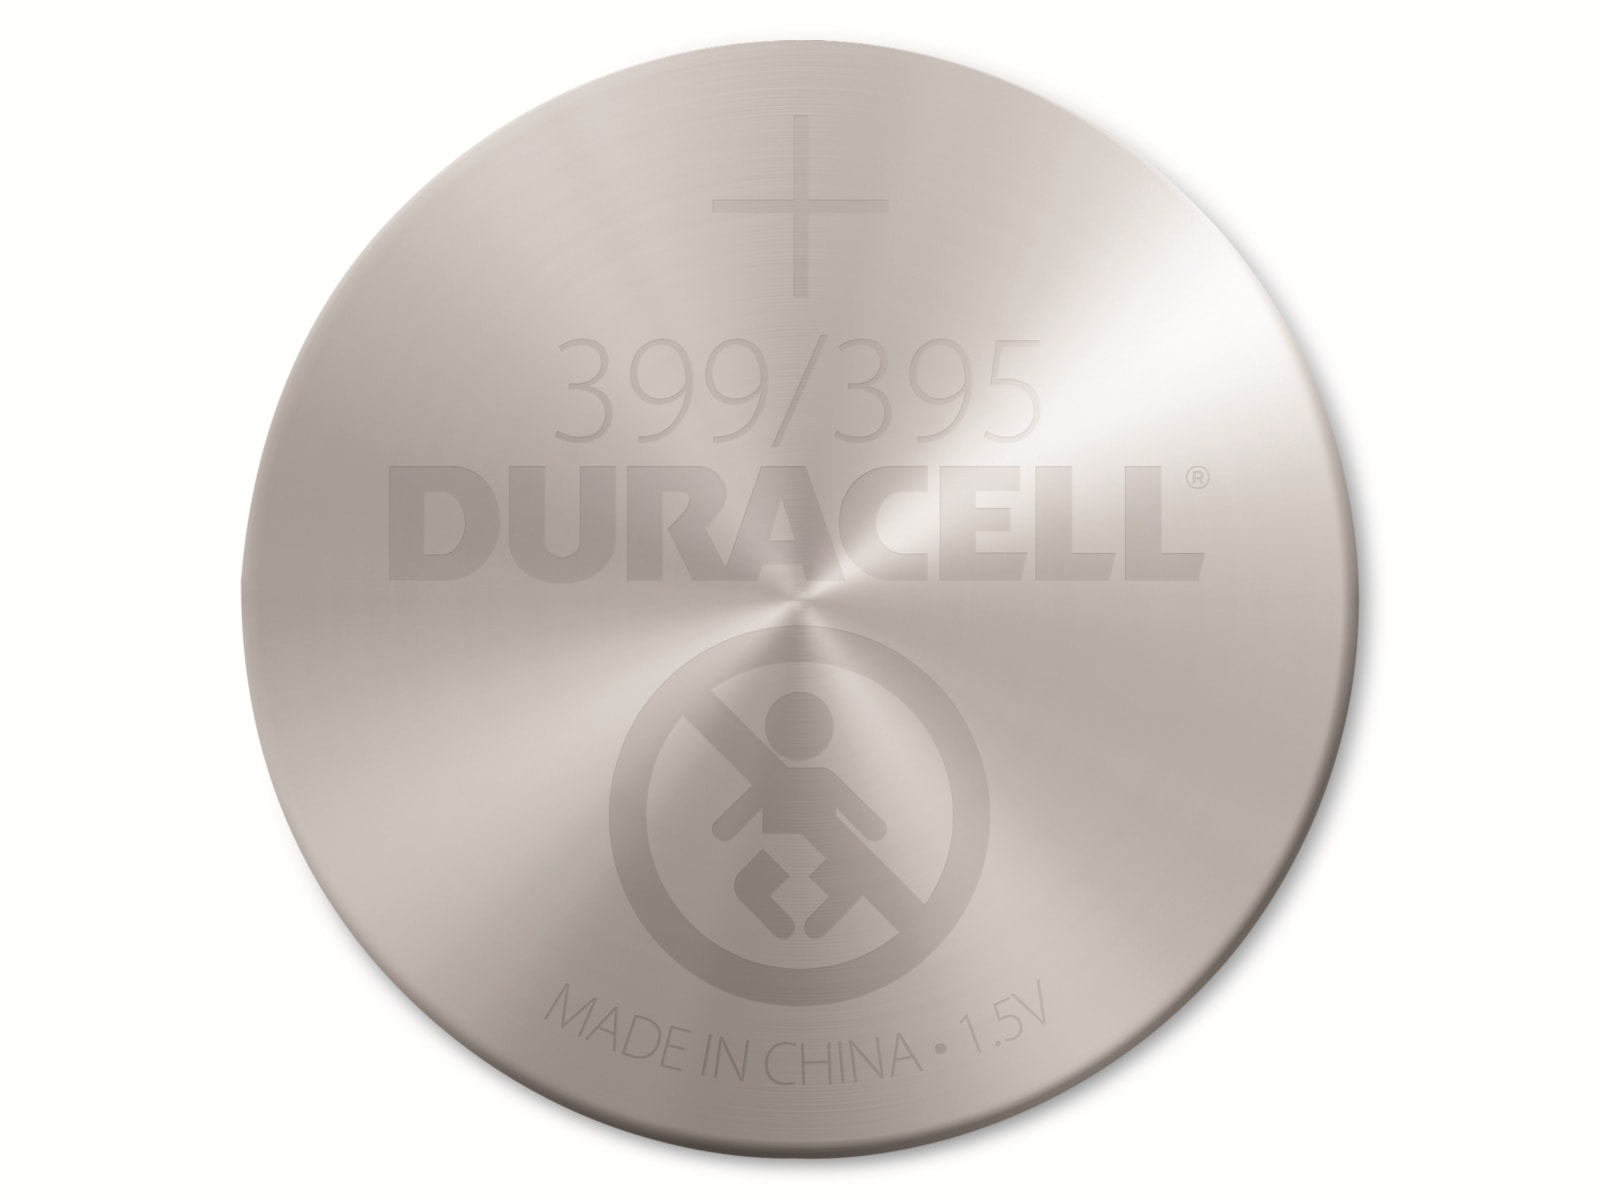 DURACELL Silver Oxide-Knopfzelle SR57, 1.5V, Watch